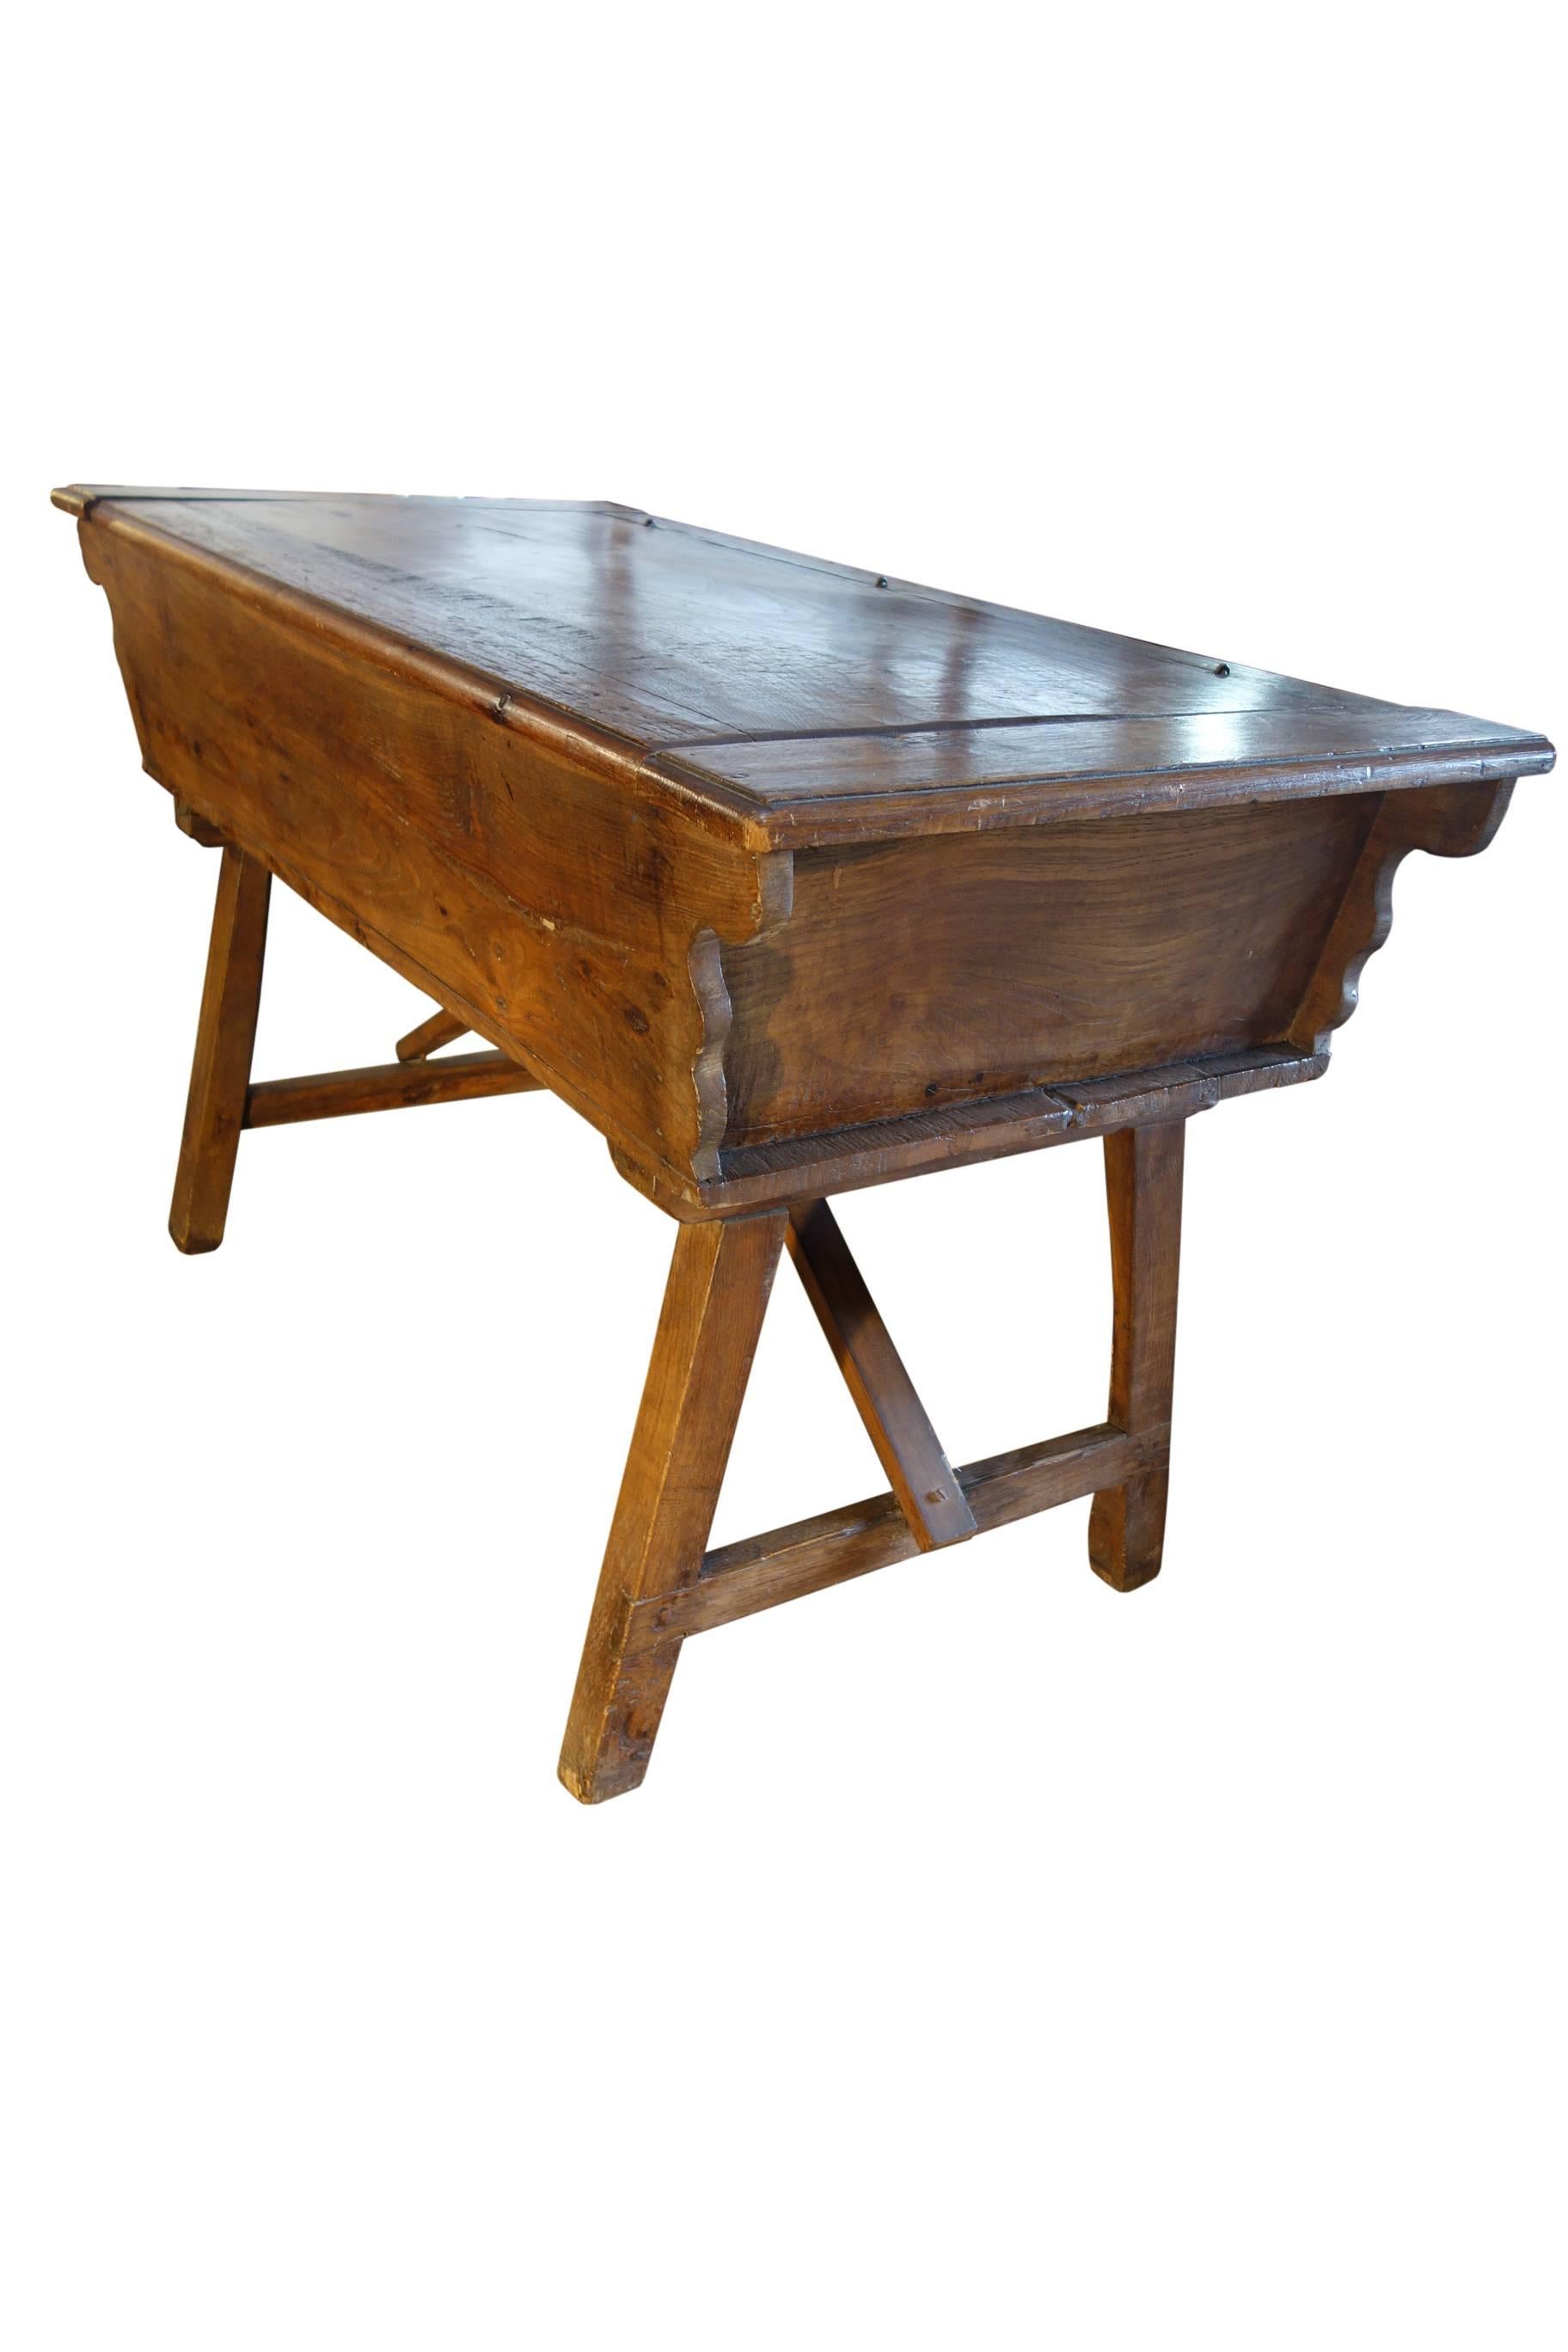 Antique Italian working table to produce and storage bread. Simple lines and solid walnut.
Dimensions: 52.6